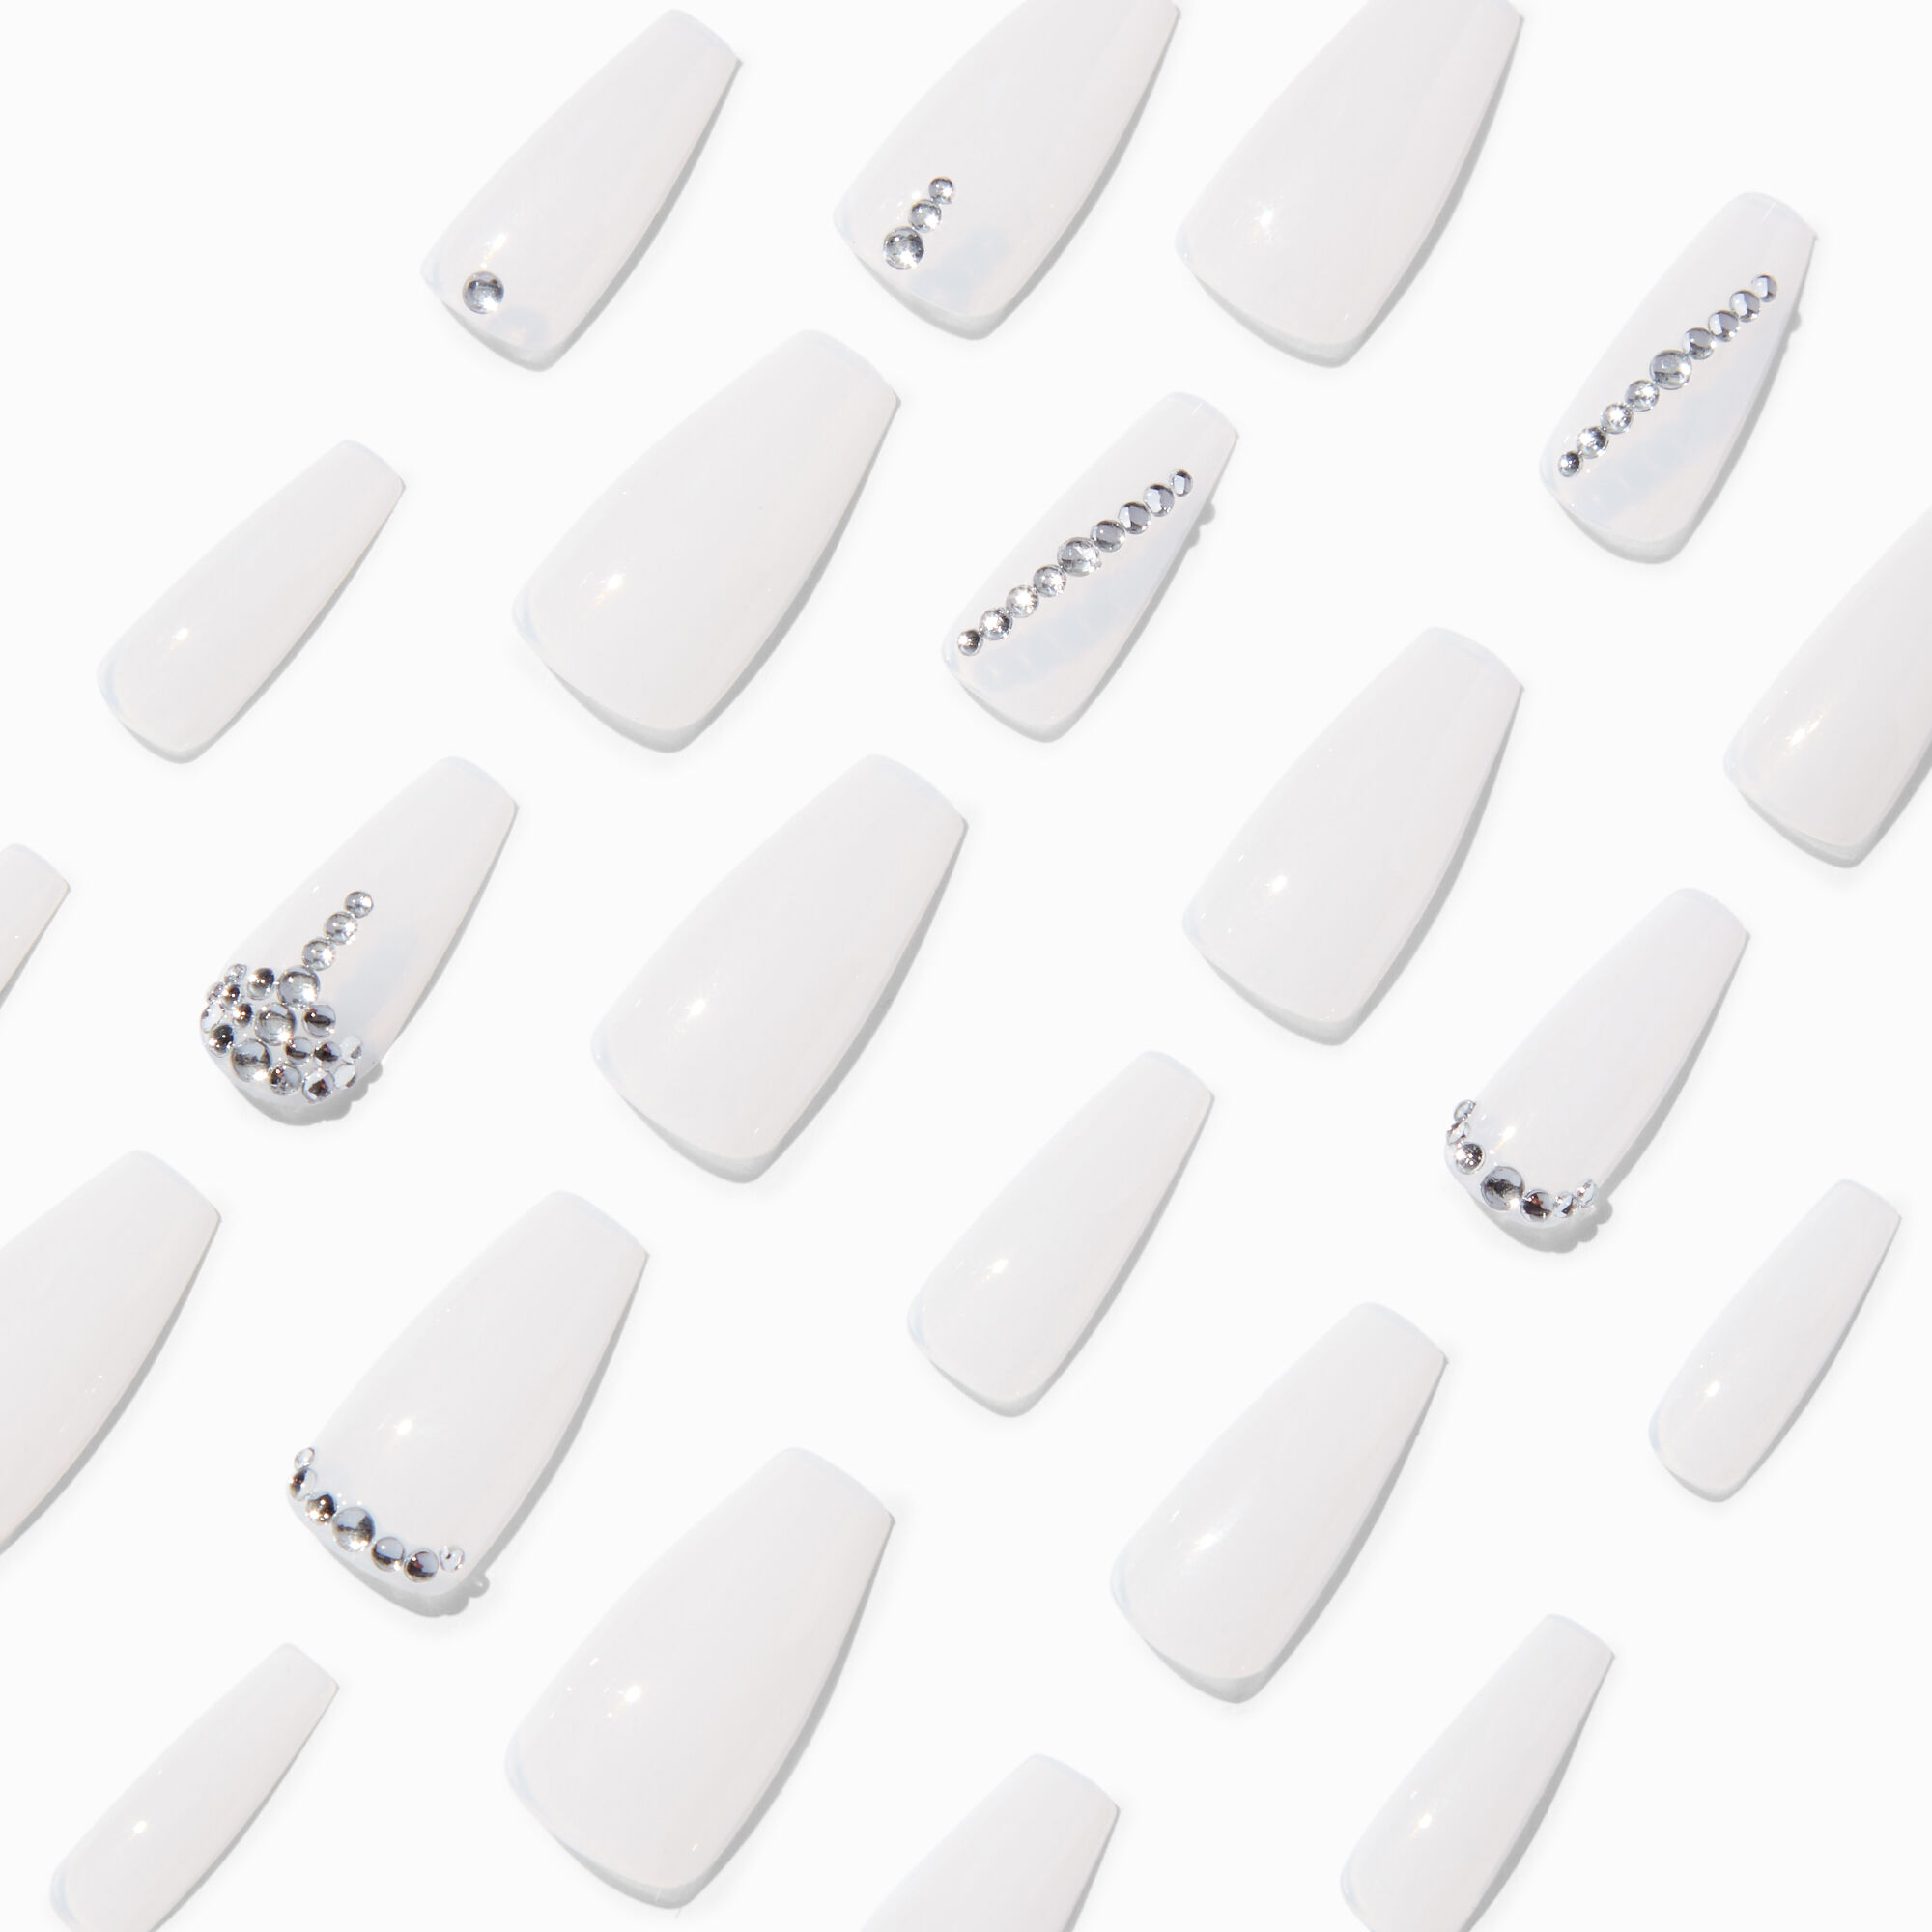 View Claires Milky Bling Squareletto Faux Nail Set 24 Pack information